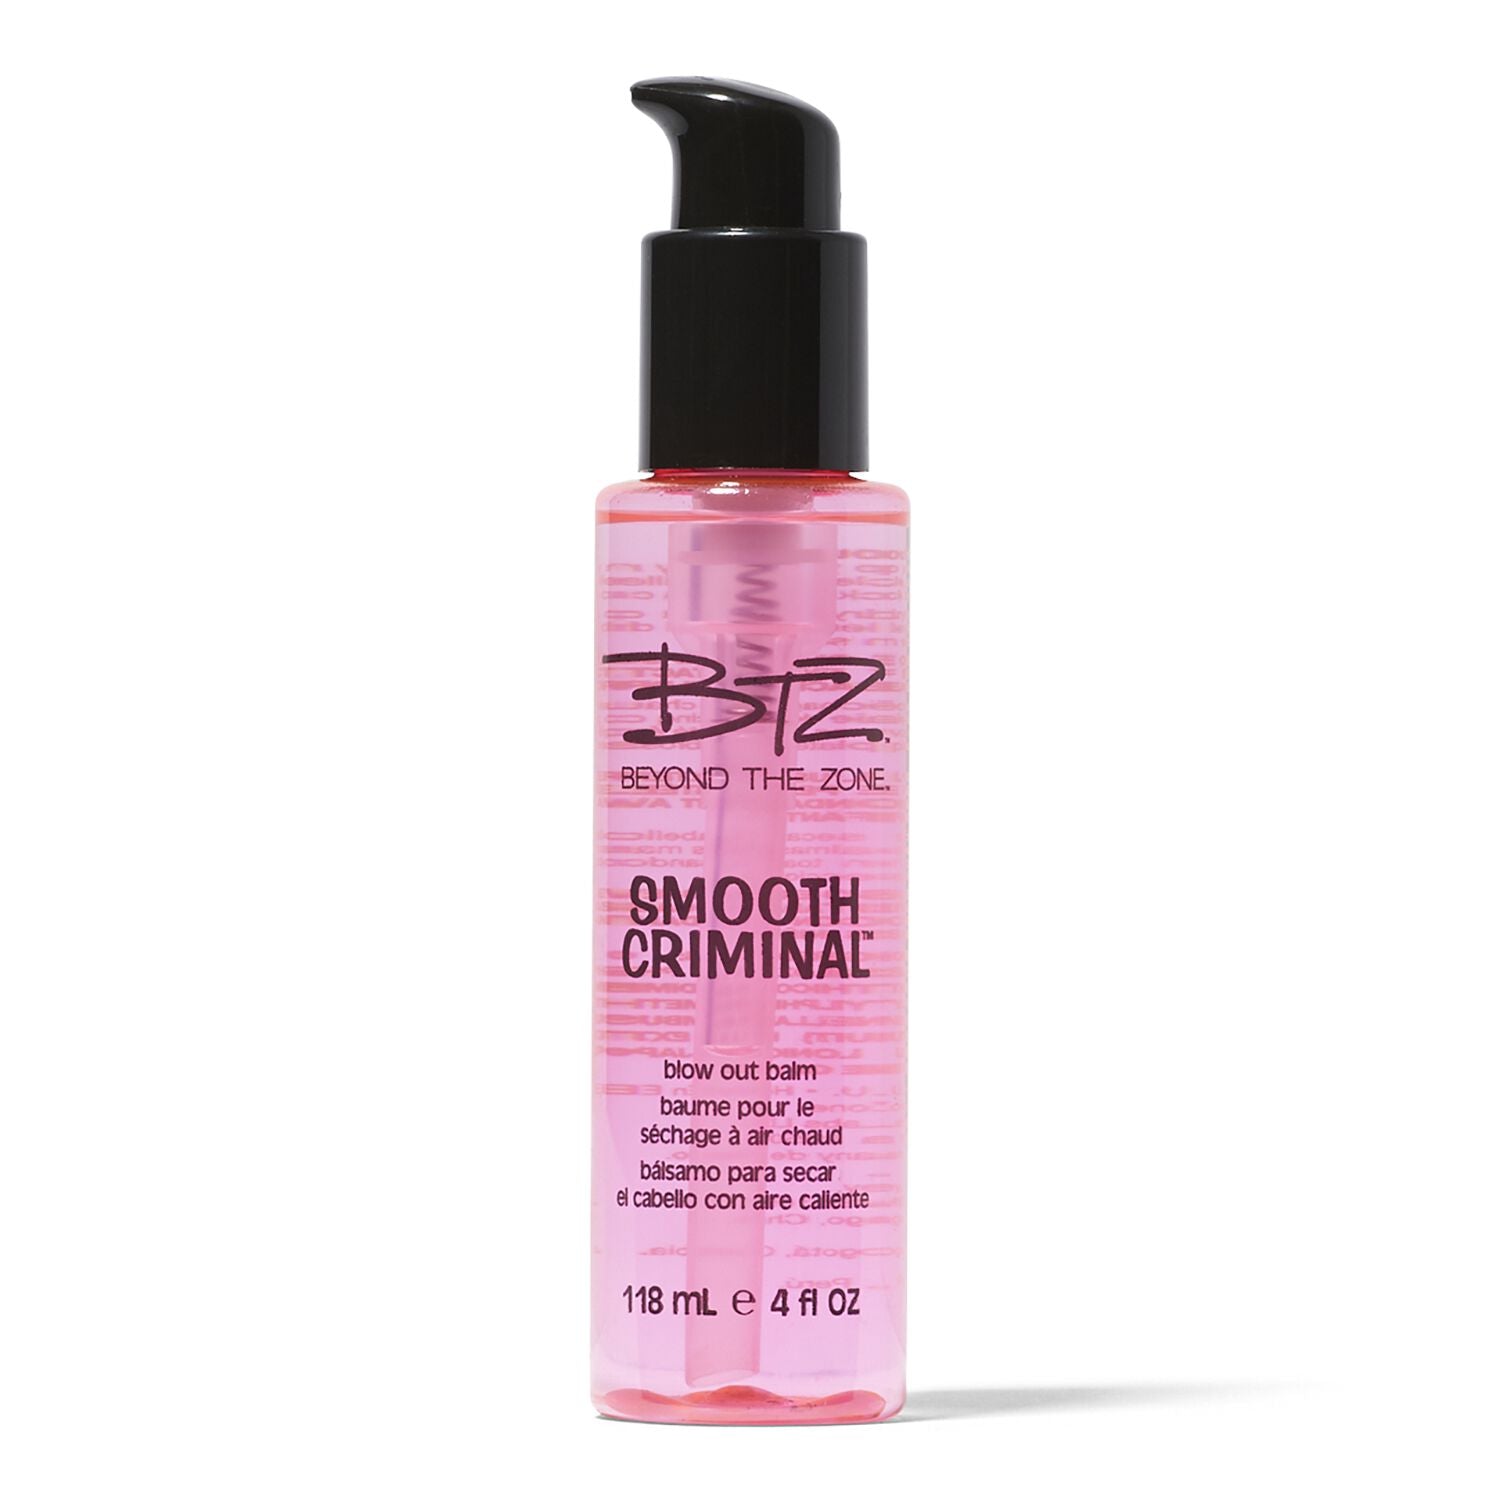 SMTHCR  by   Beyond the Zone Blow Out Balm